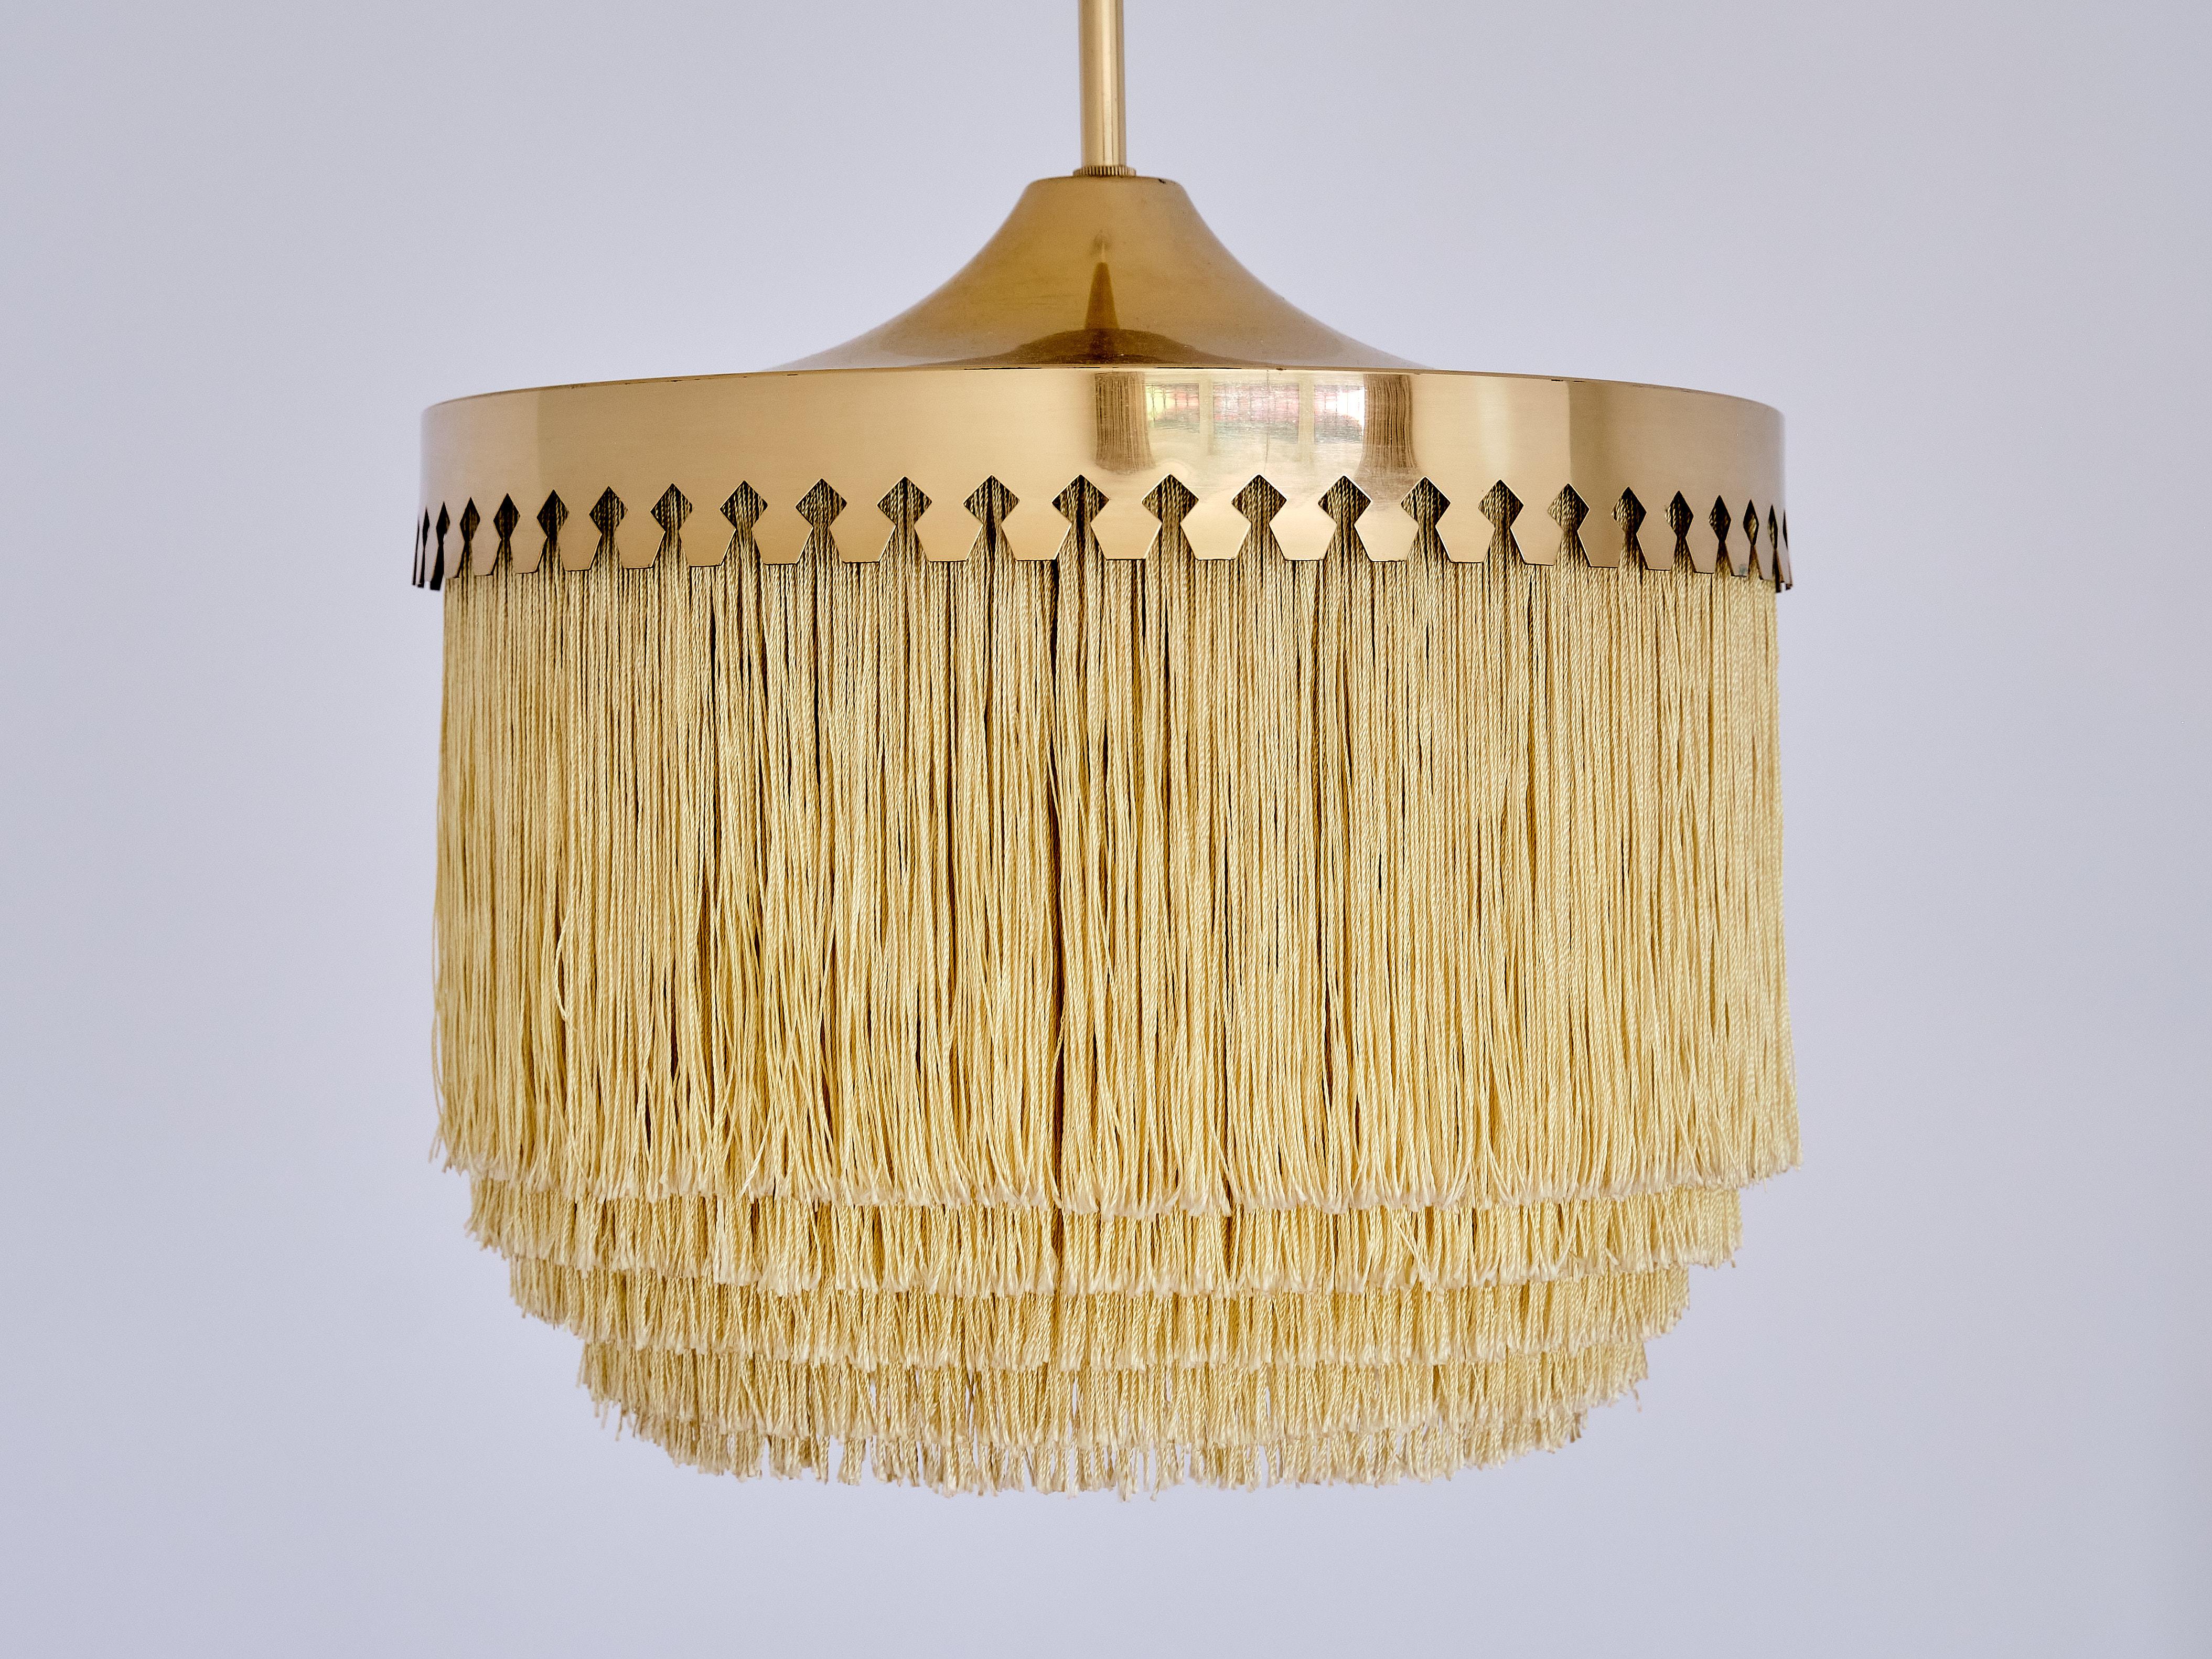 This striking pendant light was designed by Hans-Agne Jakobsson and produced by his company in Markaryd, Sweden in the 1960s. This model was numbered T601 and is part of his iconic fringe series.

The design is marked by the brass fixture with its